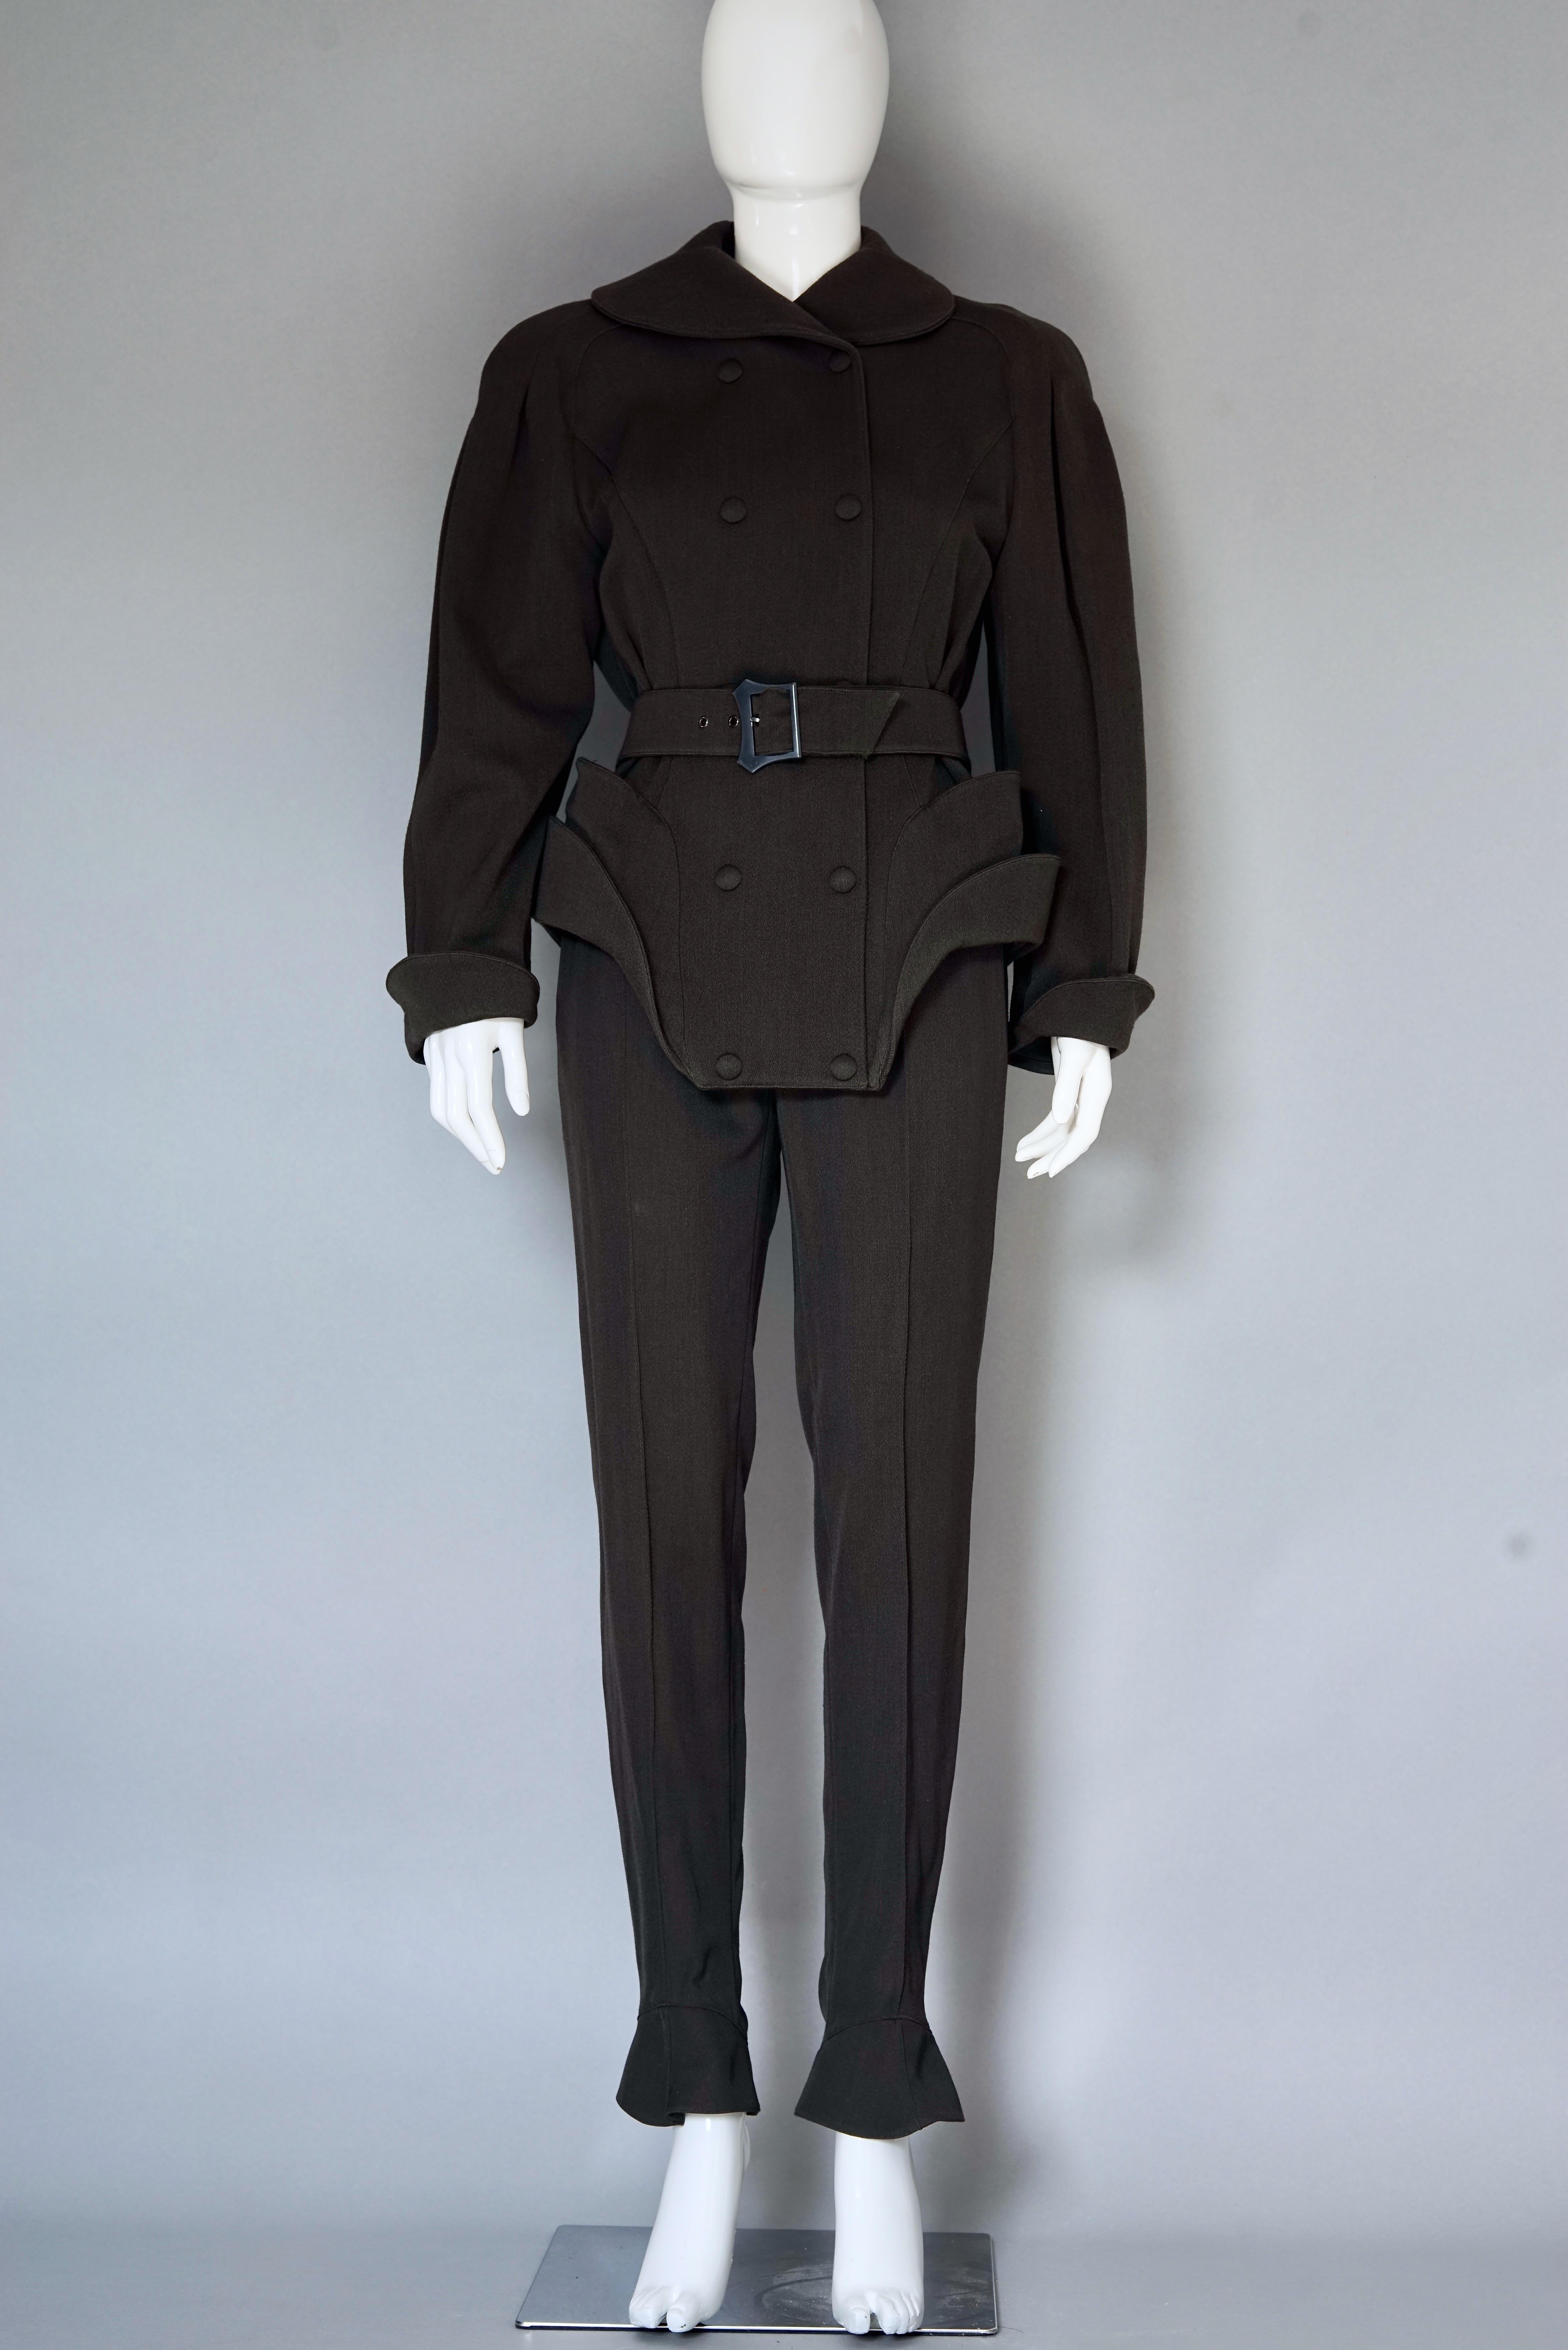 Vintage RARE THIERRY MUGLER Space Age Sculptural Belted Jacket Trouser Suit

Measurements taken laid flat, please double bust, waist and hips :
JACKET/ BLAZER
Raglan Sleeve: 15.74 inches (74 cm) from neckline - shoulder - cuff
Bust: 29.13 inches (48